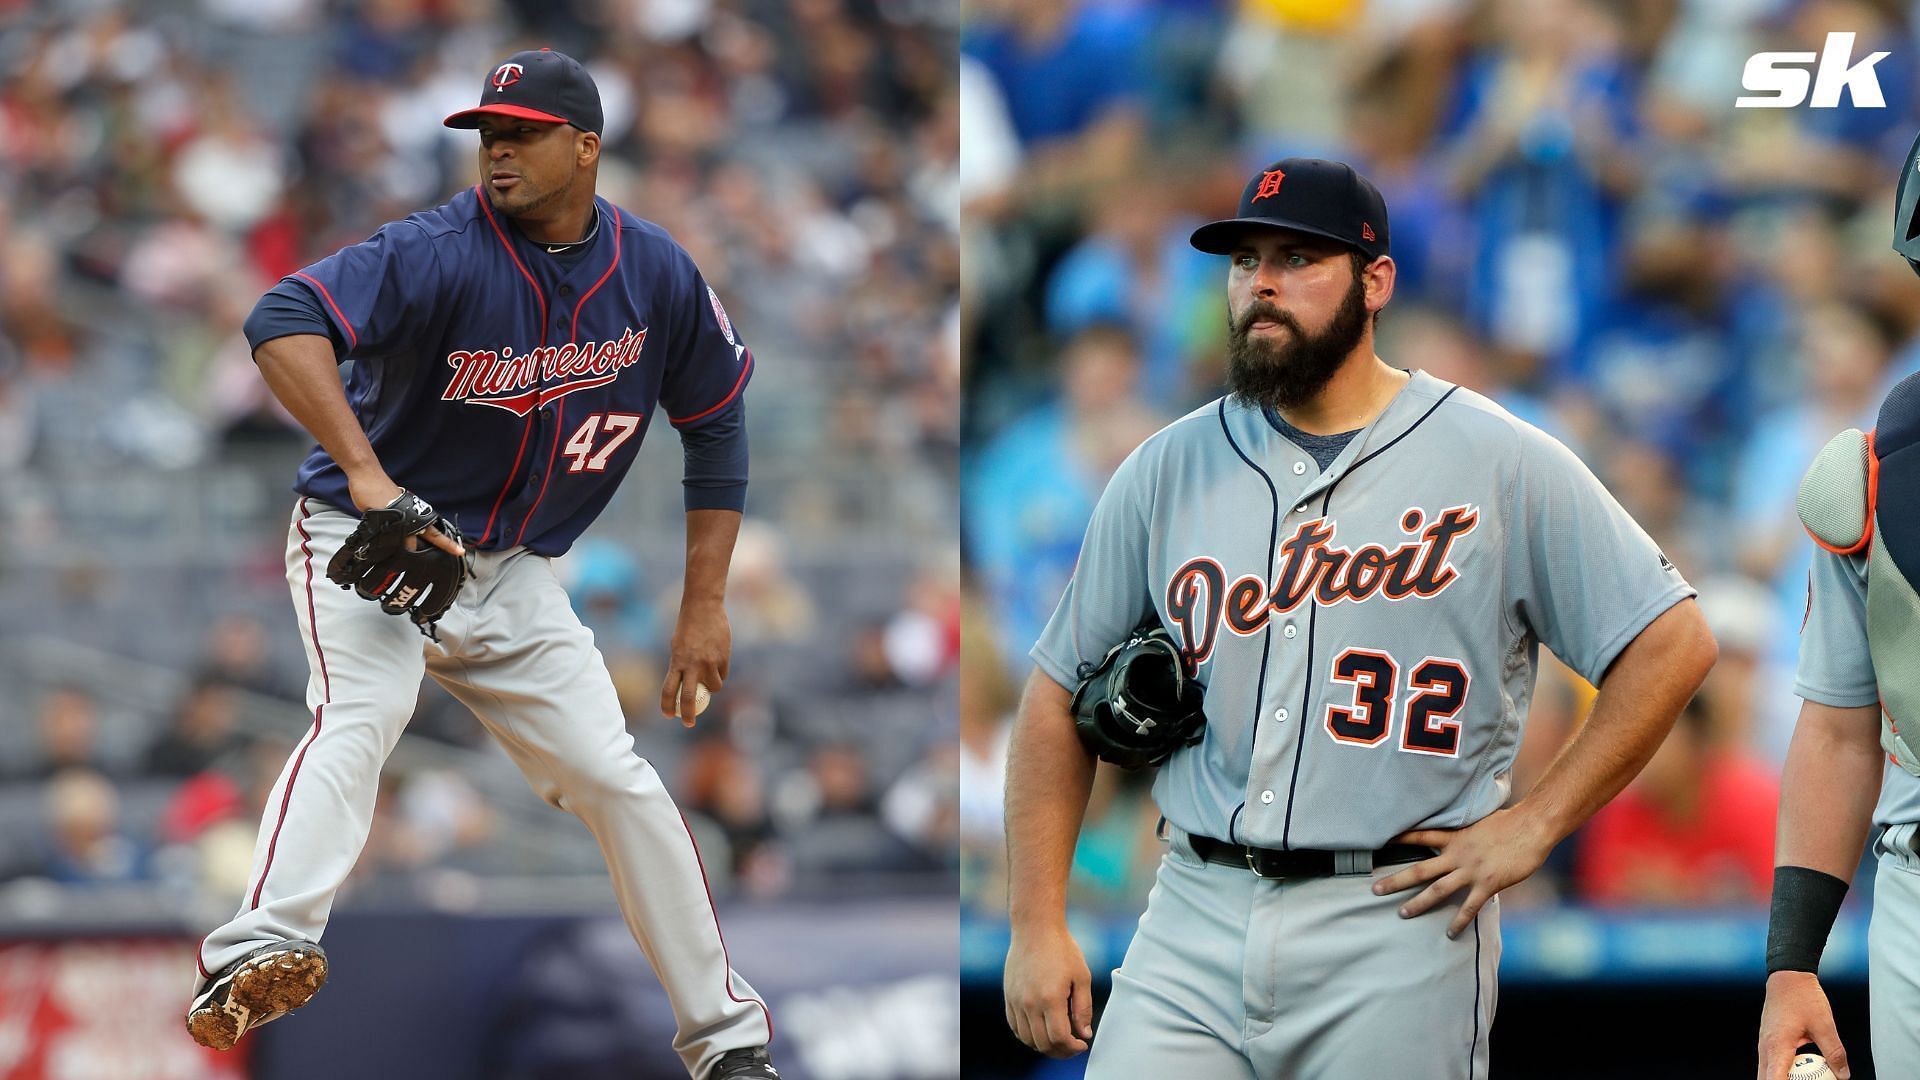 Which Twins players have also played for the Tigers? MLB Immaculate Grid Answers September 18